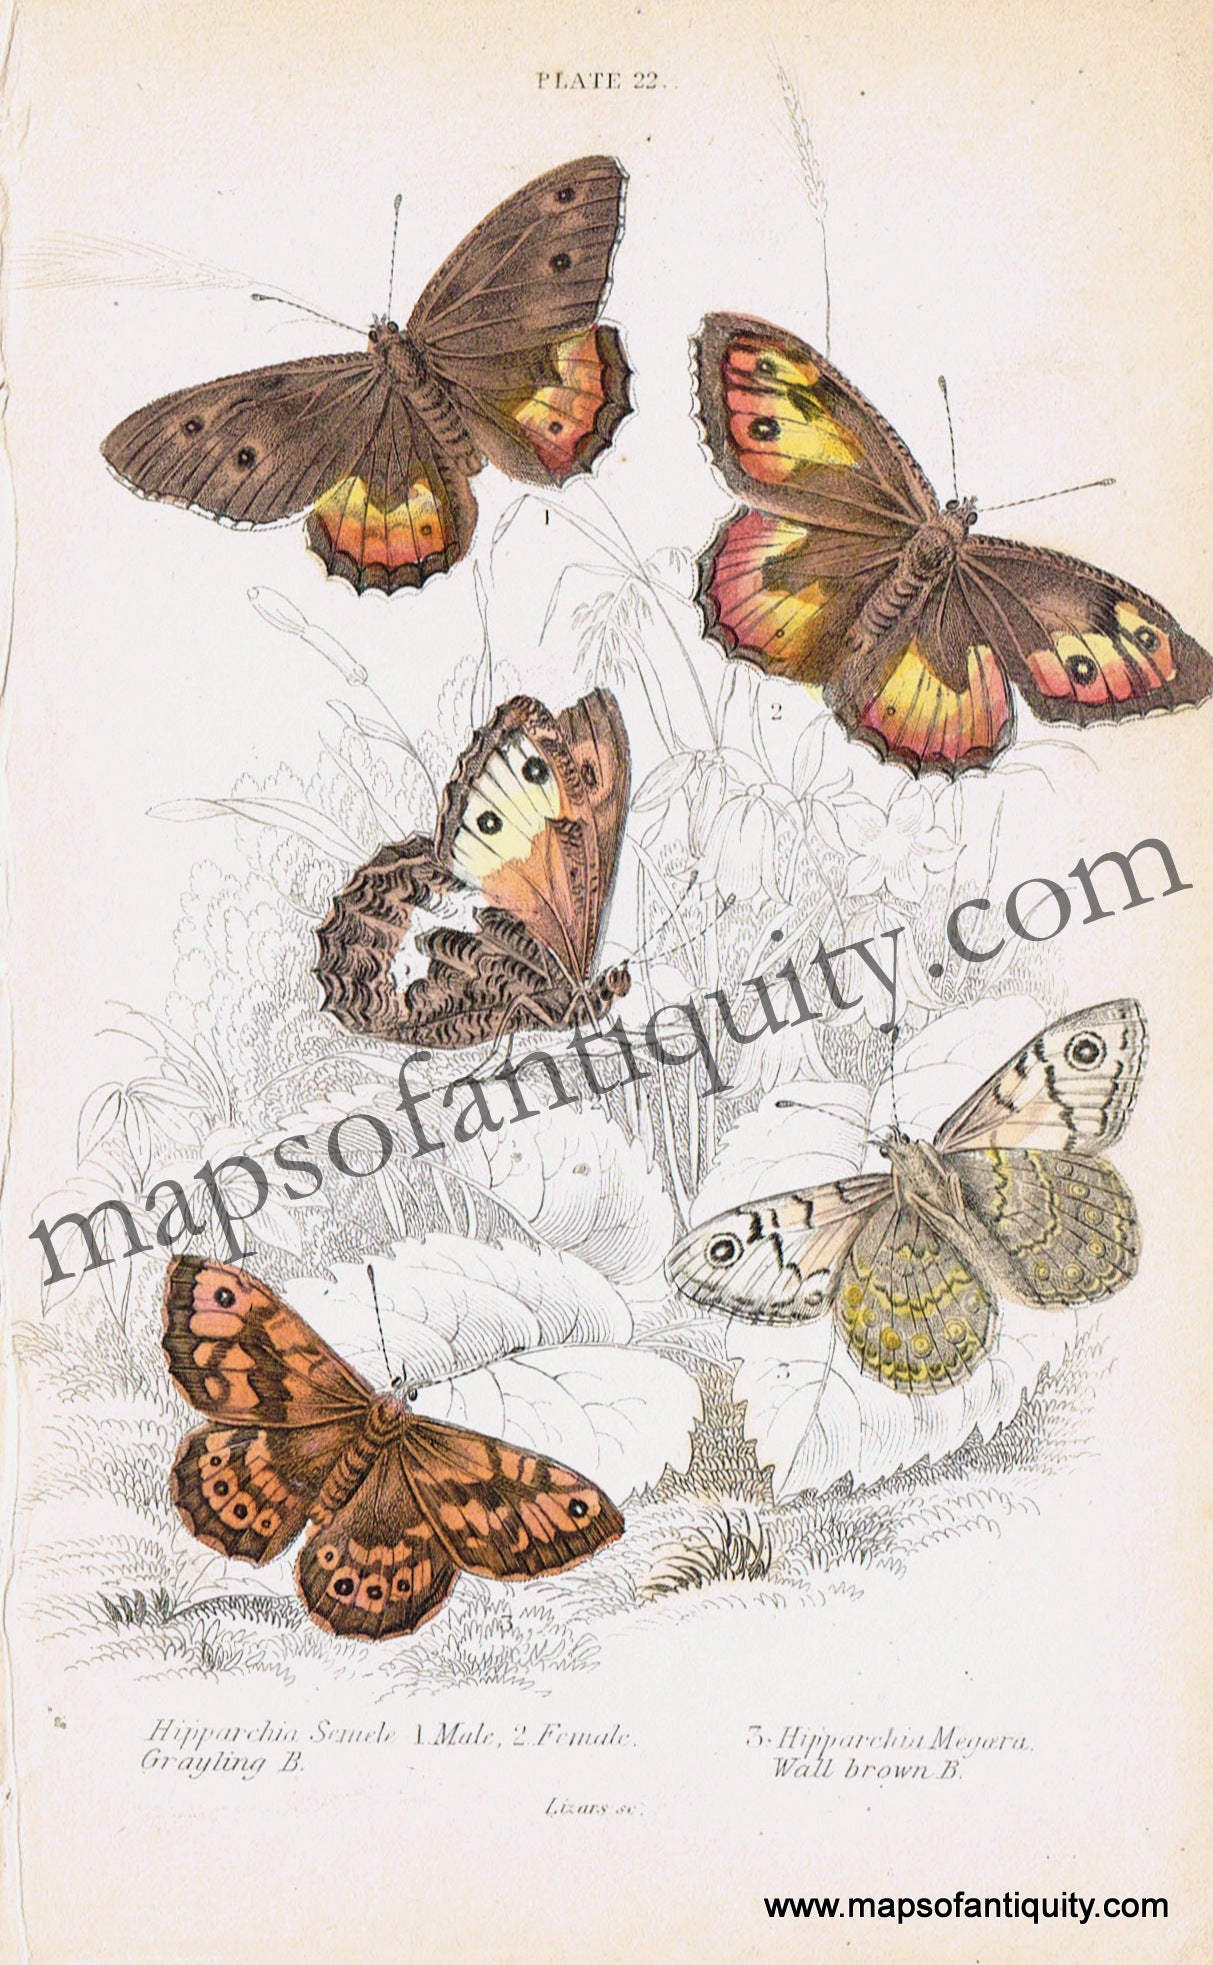 Antique-Hand-Colored-Print-Hipparchia-semele-&-Hipparchia-megara-Antique-Prints-Natural-History-Insects-1840-Duncan-Maps-Of-Antiquity